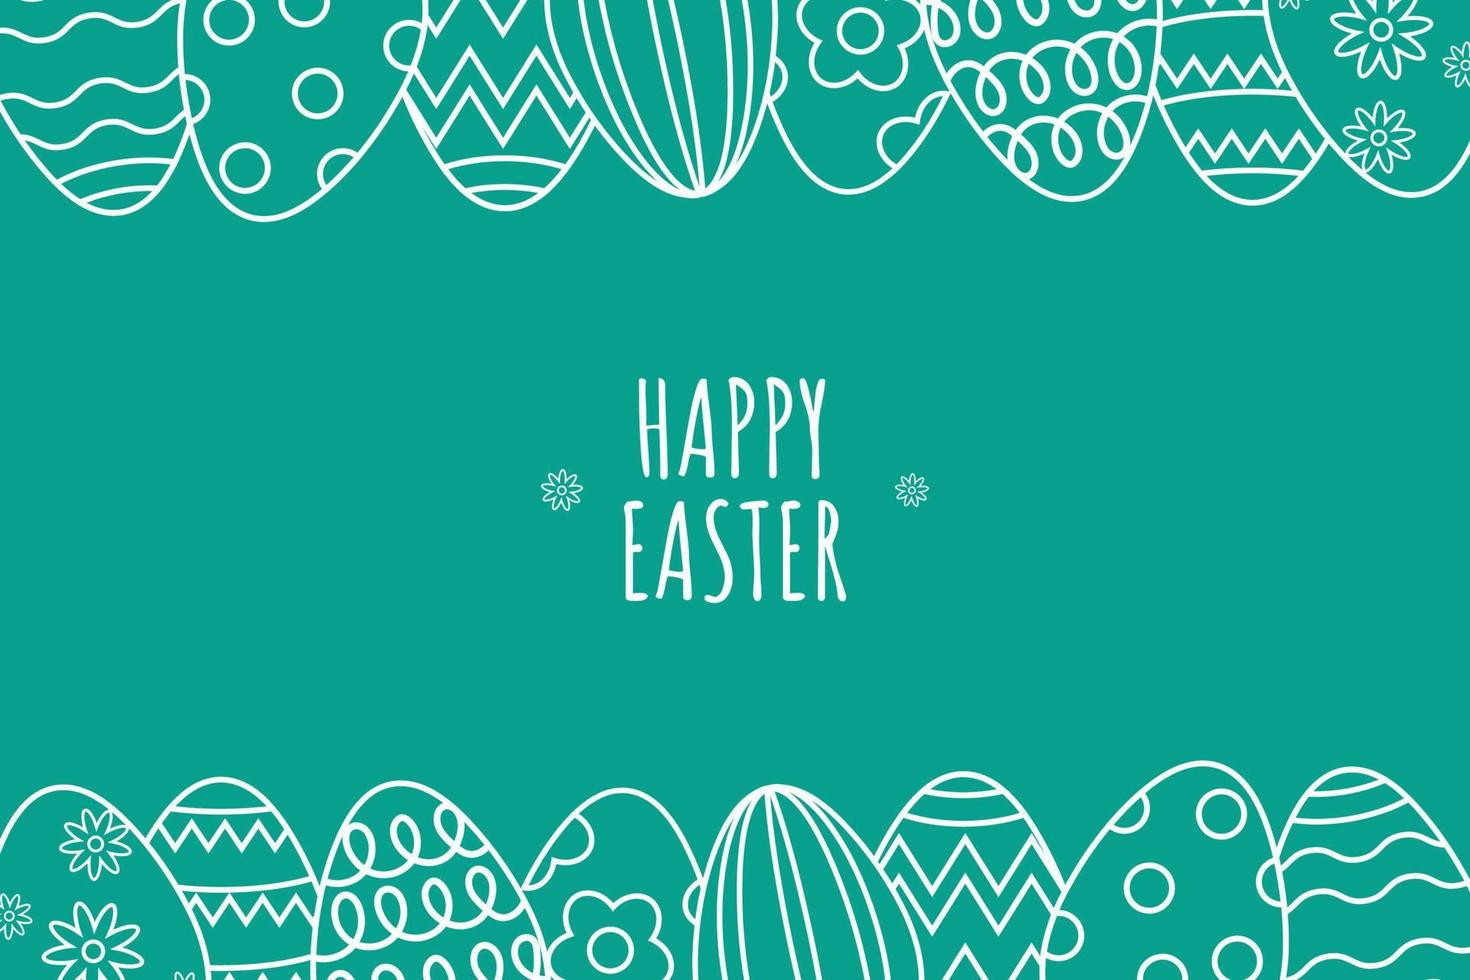 Happy Easter Backgorund in Line art style with typography, eggs, and flowers. Good for greeting card, banner, poster, flyer, and web. vector